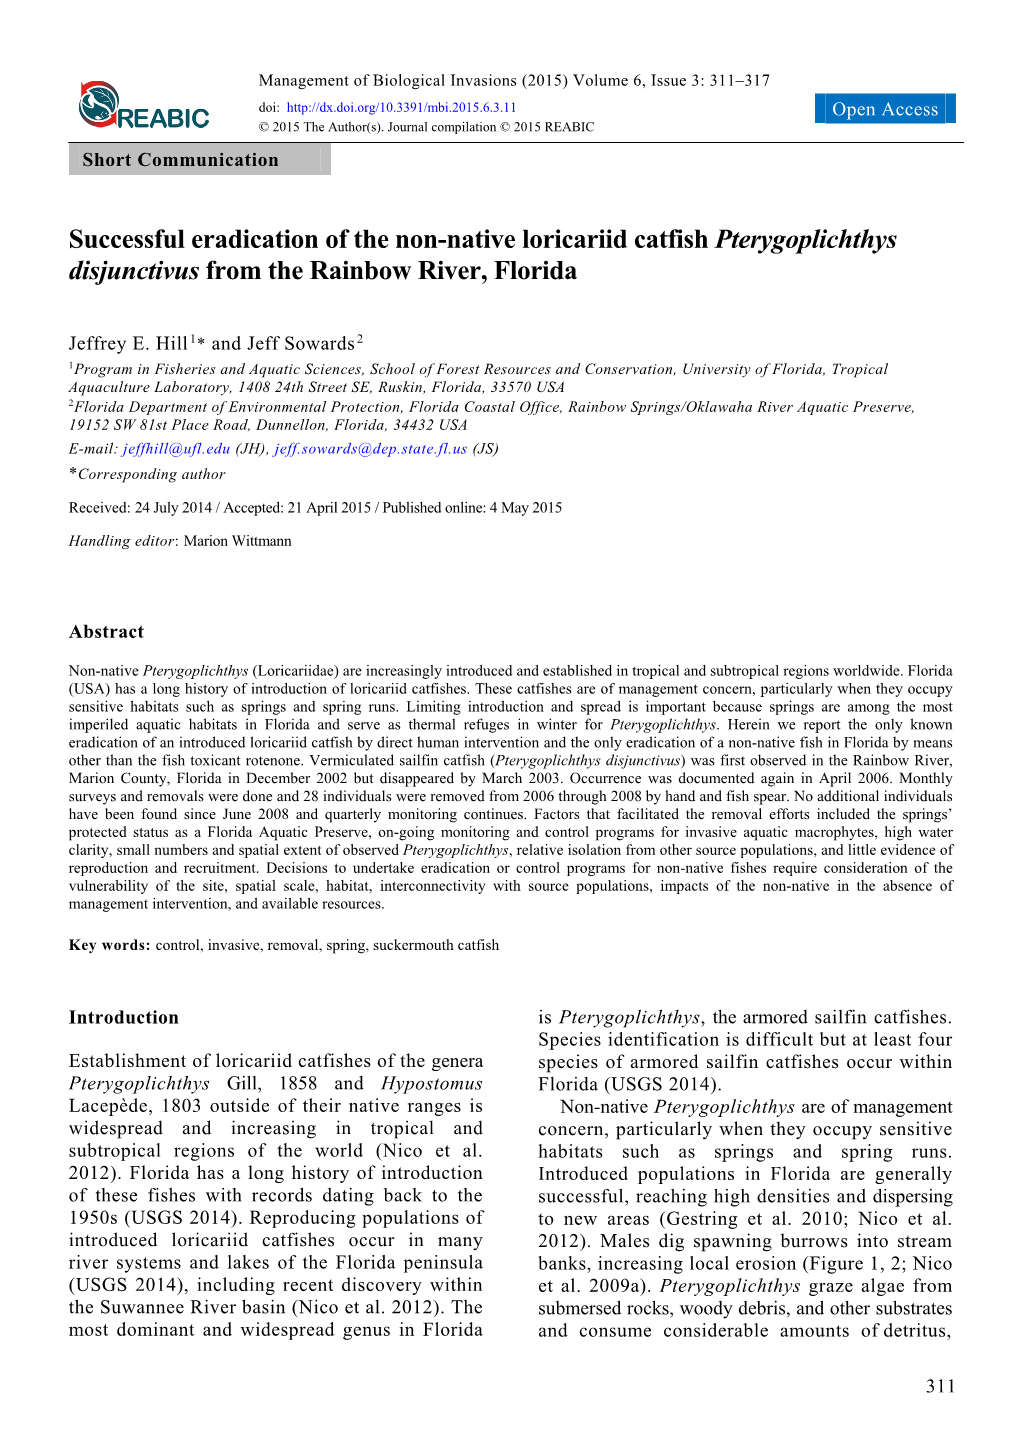 Successful Eradication of the Non-Native Loricariid Catfish Pterygoplichthys Disjunctivus from the Rainbow River, Florida